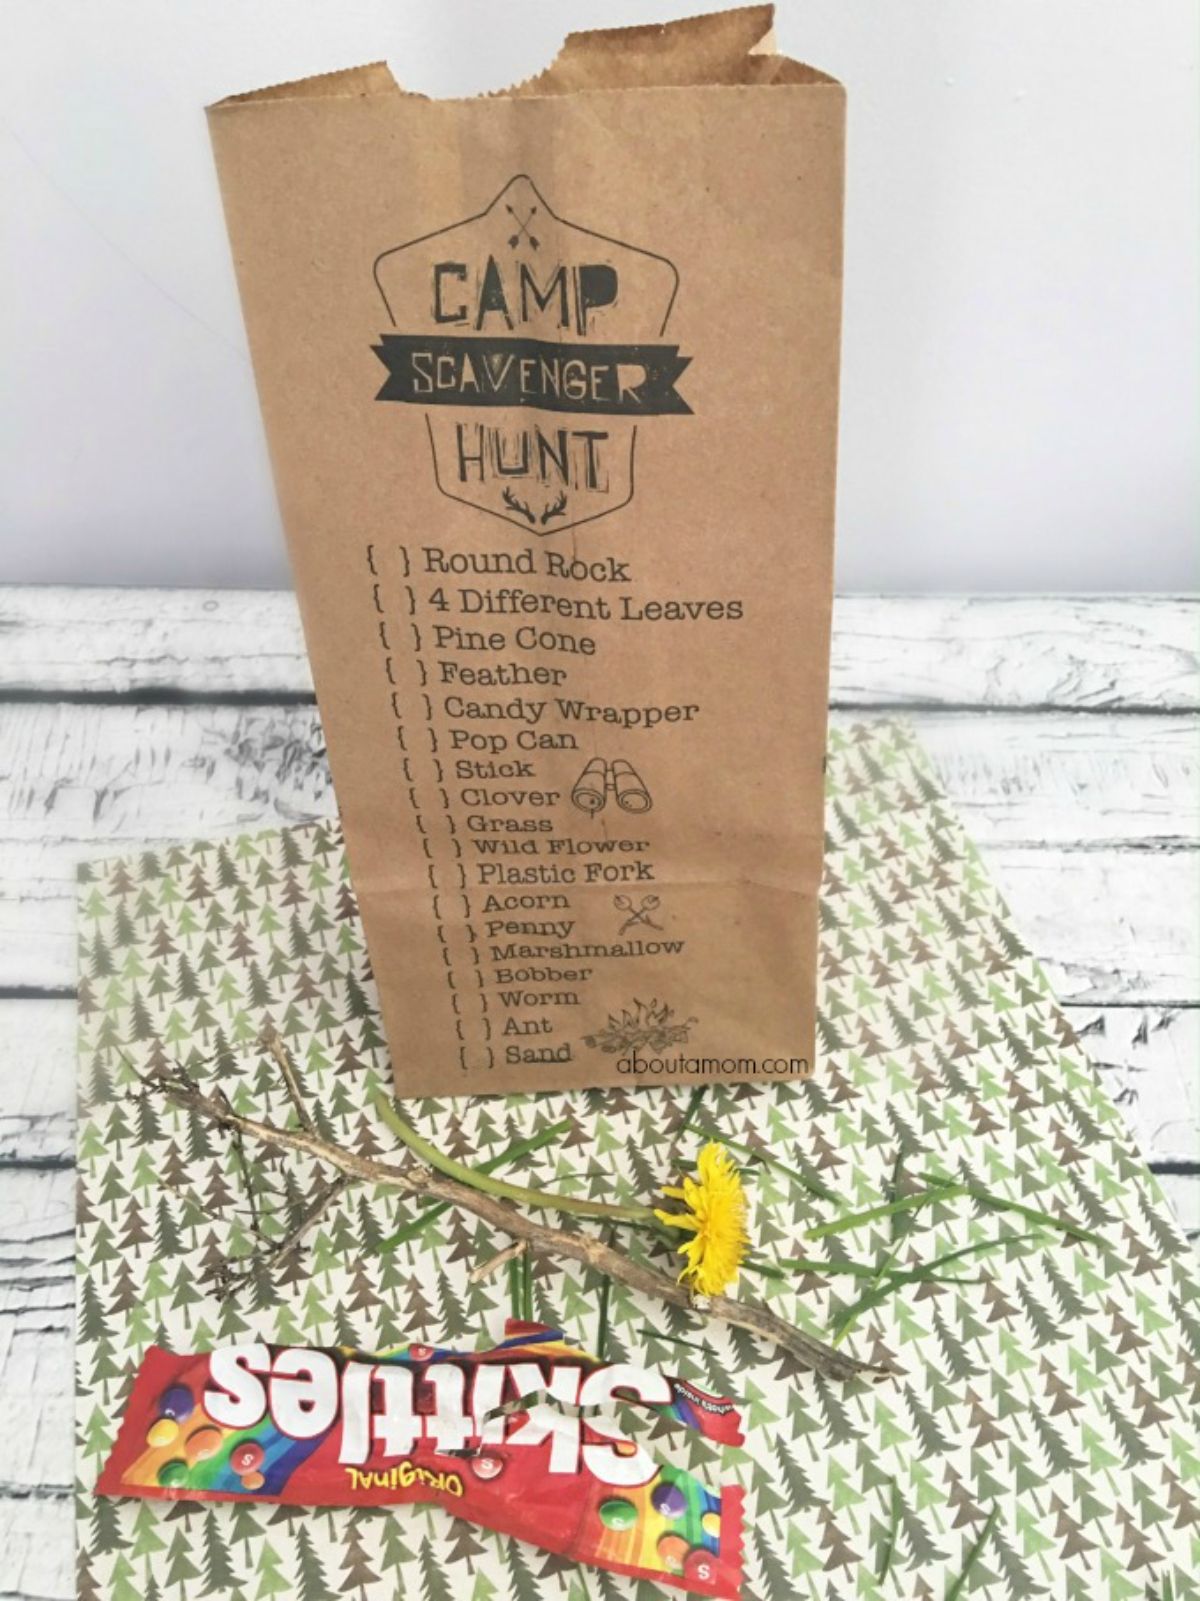 A white table with a piece of fabric laying on it printed with trees. Grass and flowers are scattered on top and a packet of skittles is in front. On top of the fabric is a brown paper bag with a scavenger hunt list printed onto it